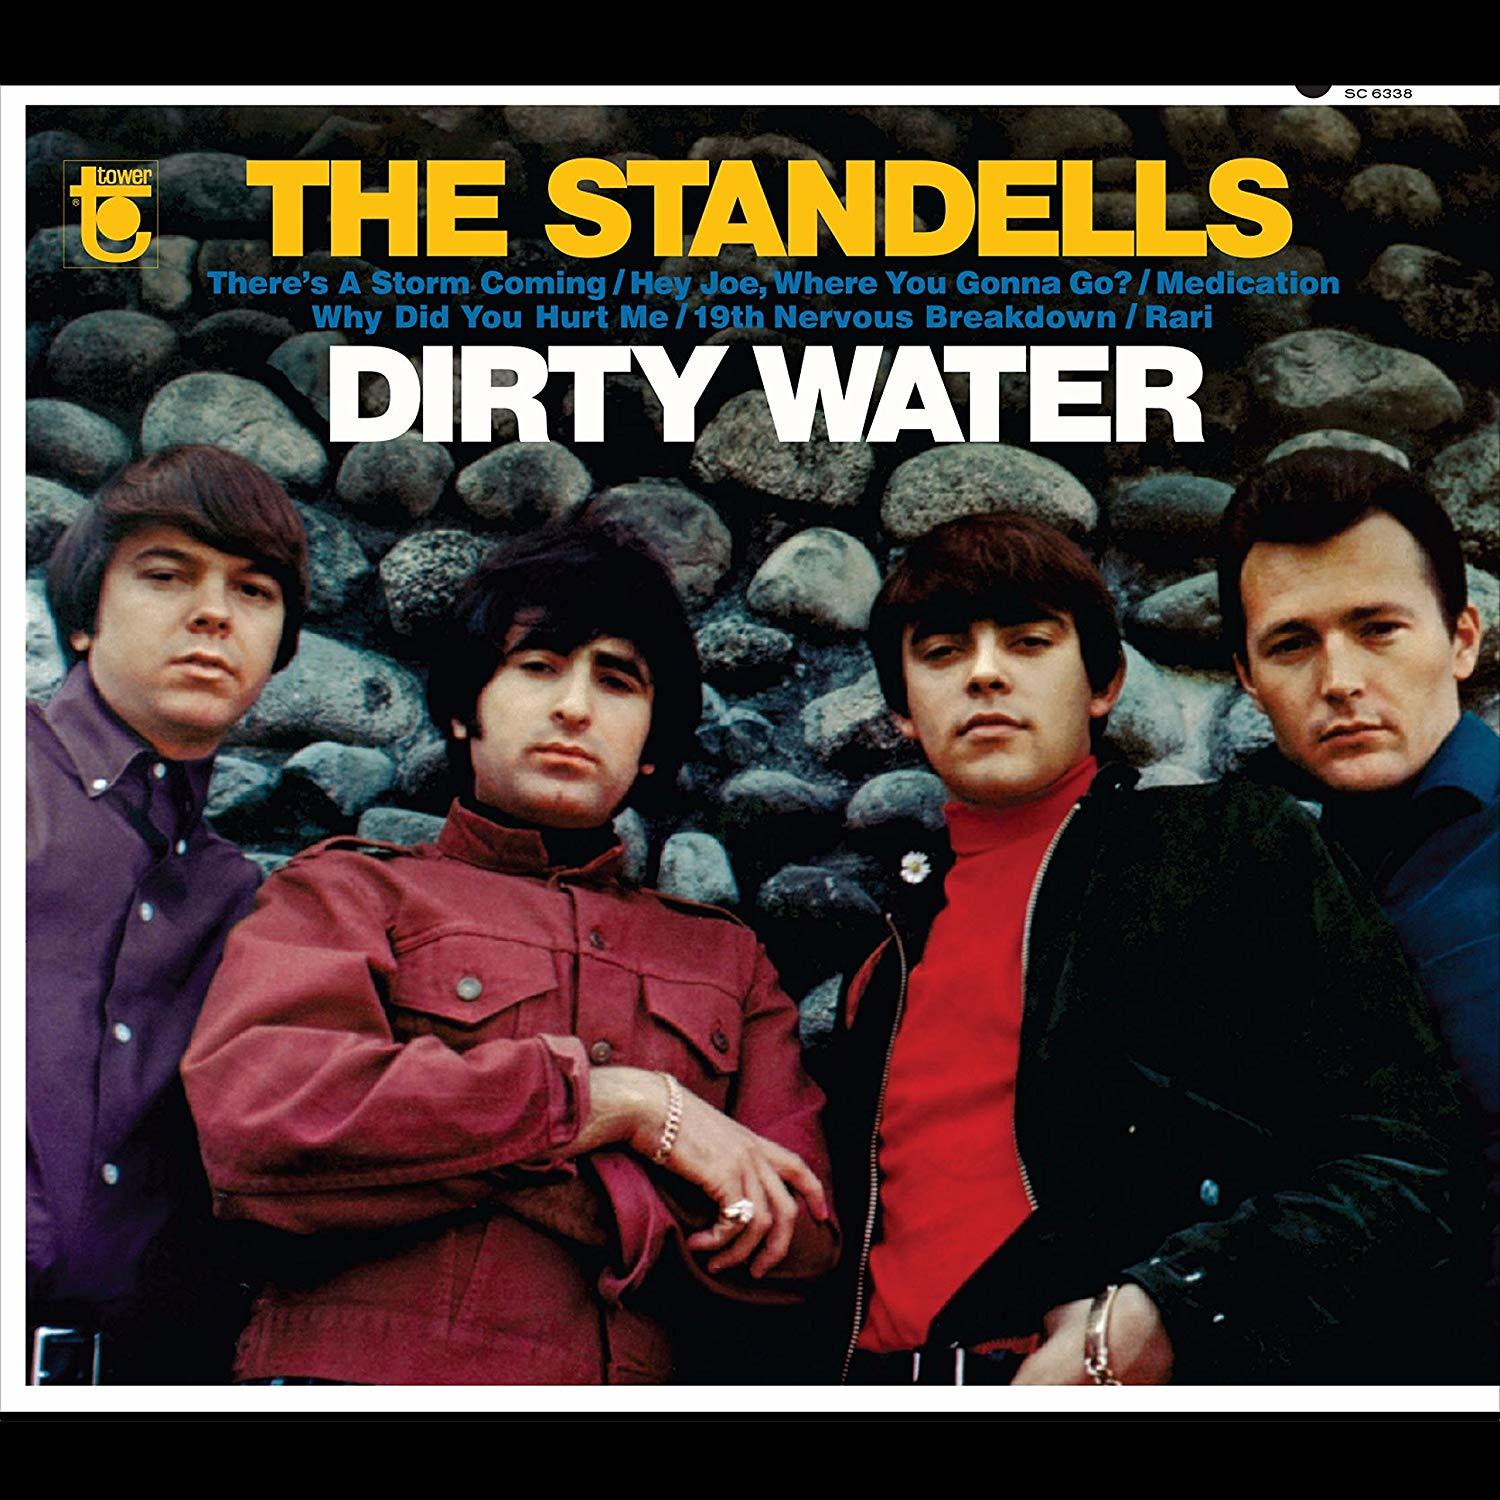 The DIRTY (CD) Standells - - WATER